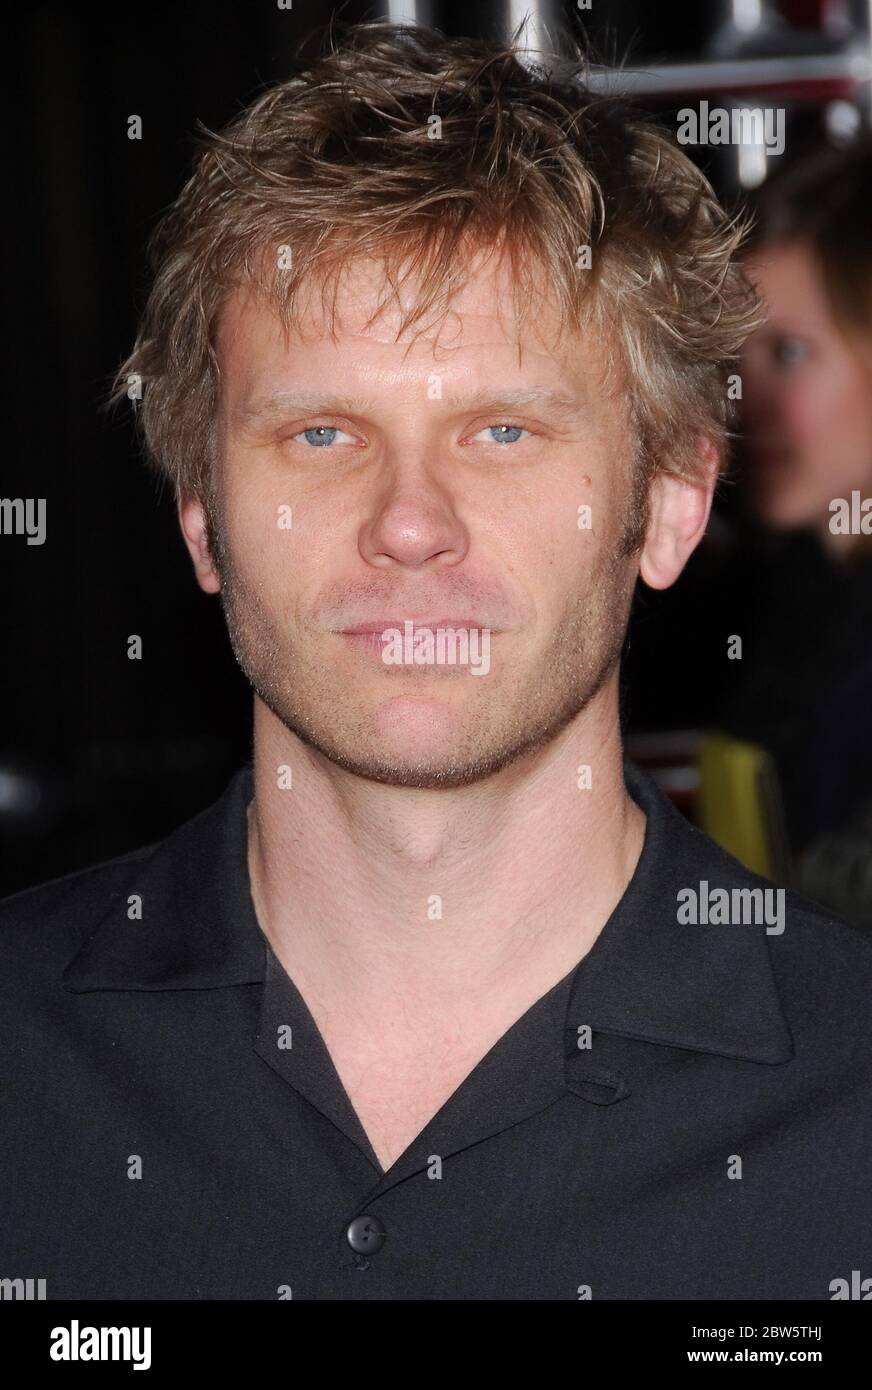 Mark Pellegrino at the 'The Number 23' Los Angeles Premiere held at The Orpheum Theater in Downtown Los Angeles, CA. The event took place on Tuesday, February 13, 2007.  Photo by: SBM / PictureLux - File Reference # 34006-2206SBMPLX Stock Photo